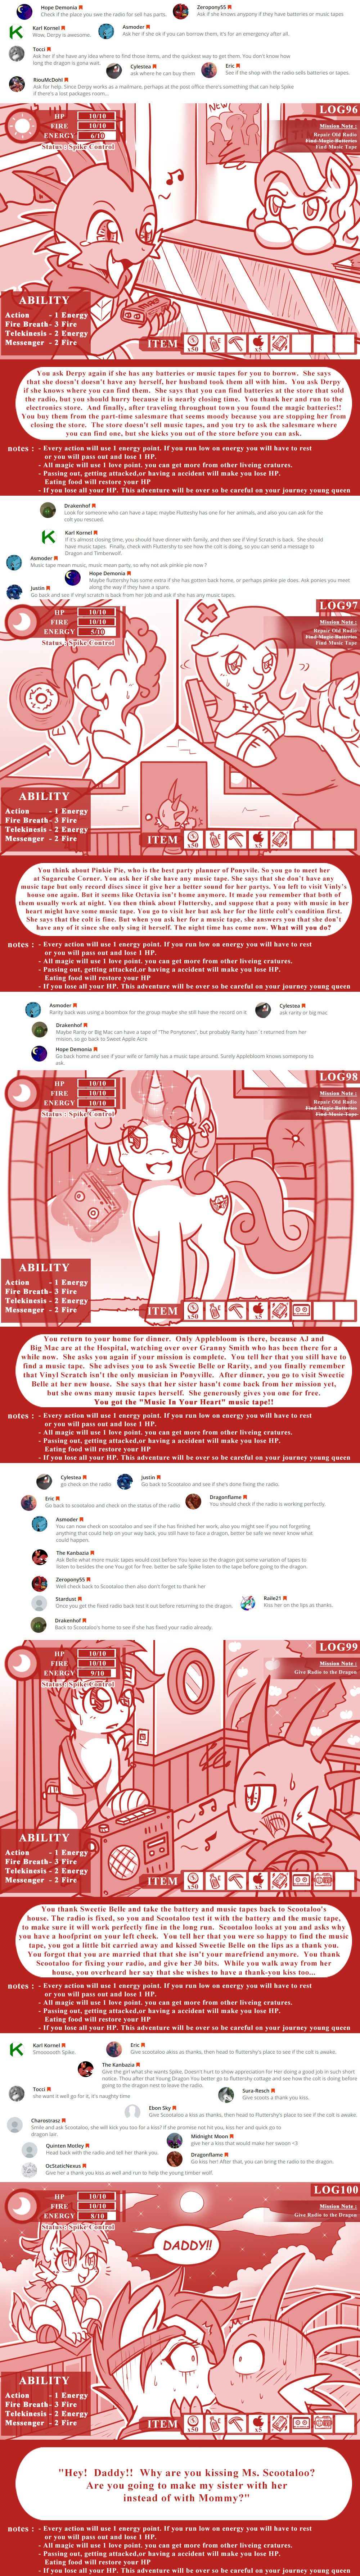 [Vavacung] The Adventure Logs Of Young Queen (My Little Pony Friendship is Magic) [Updated] [Ongoing] 22